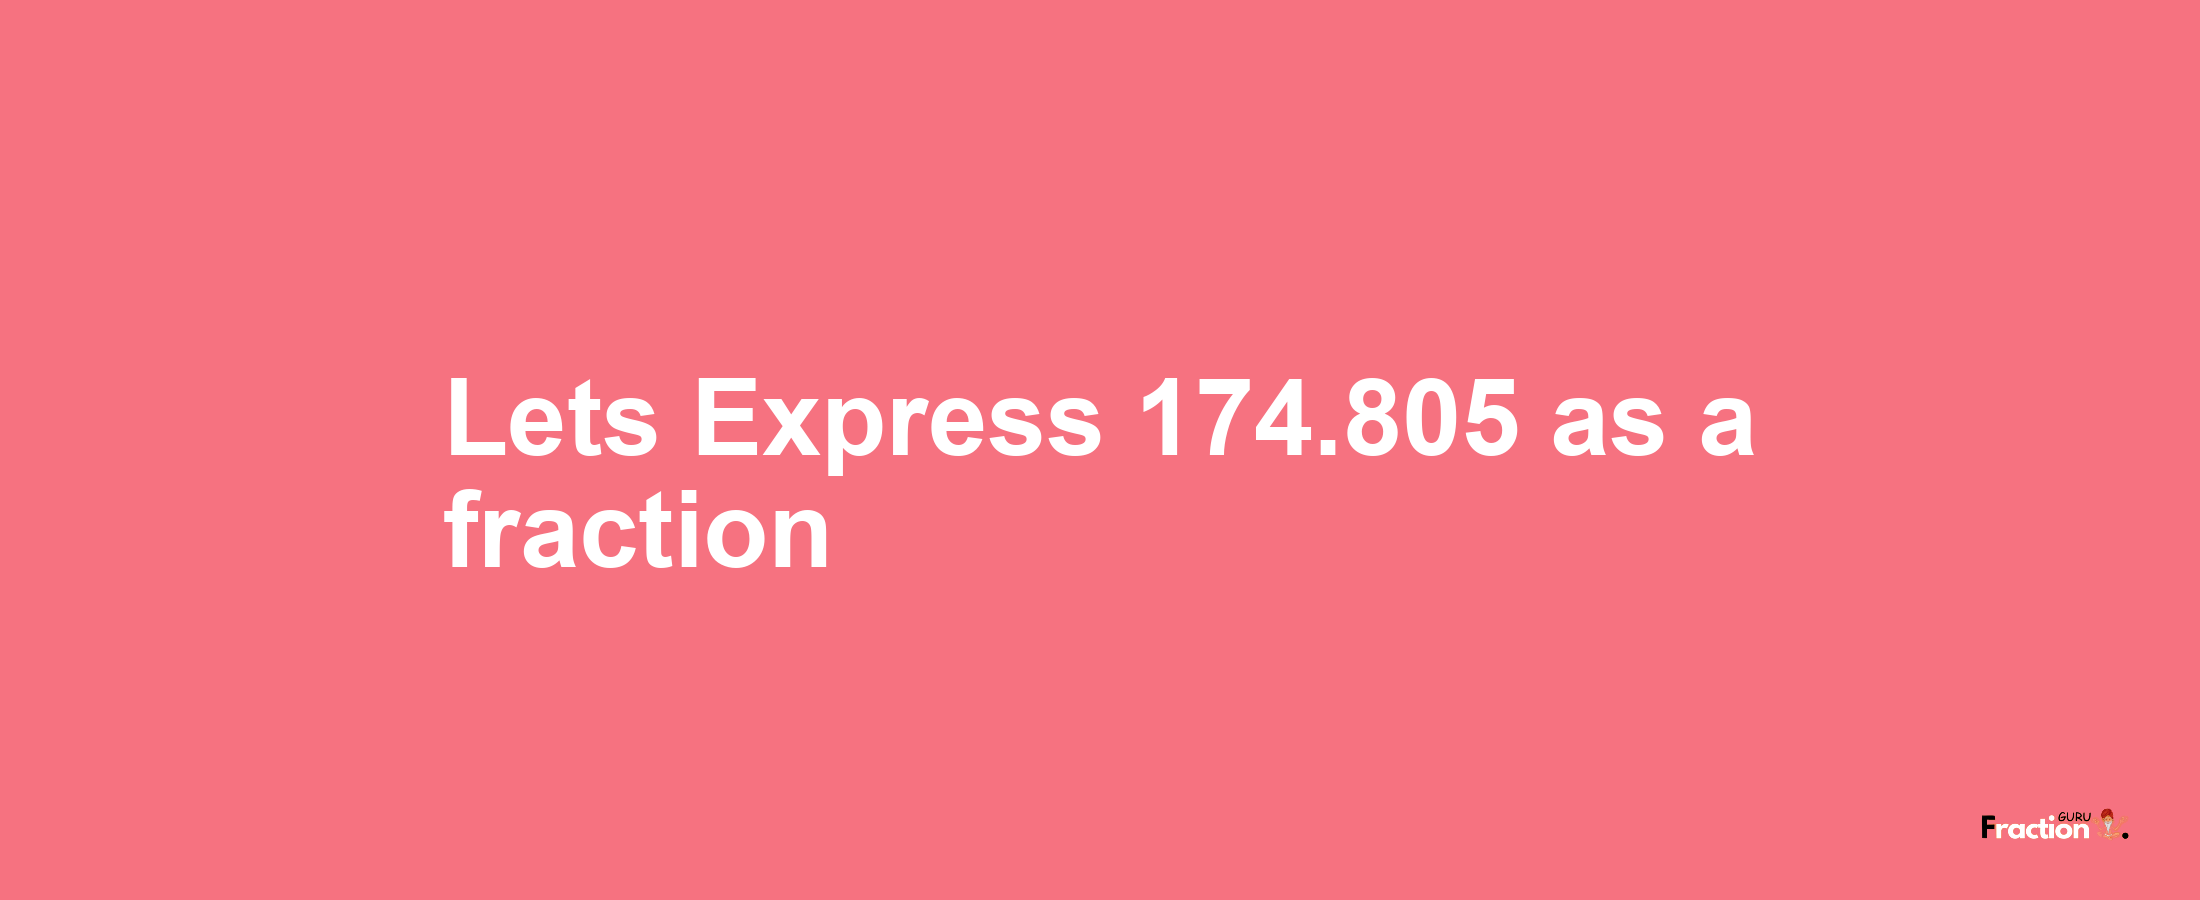 Lets Express 174.805 as afraction